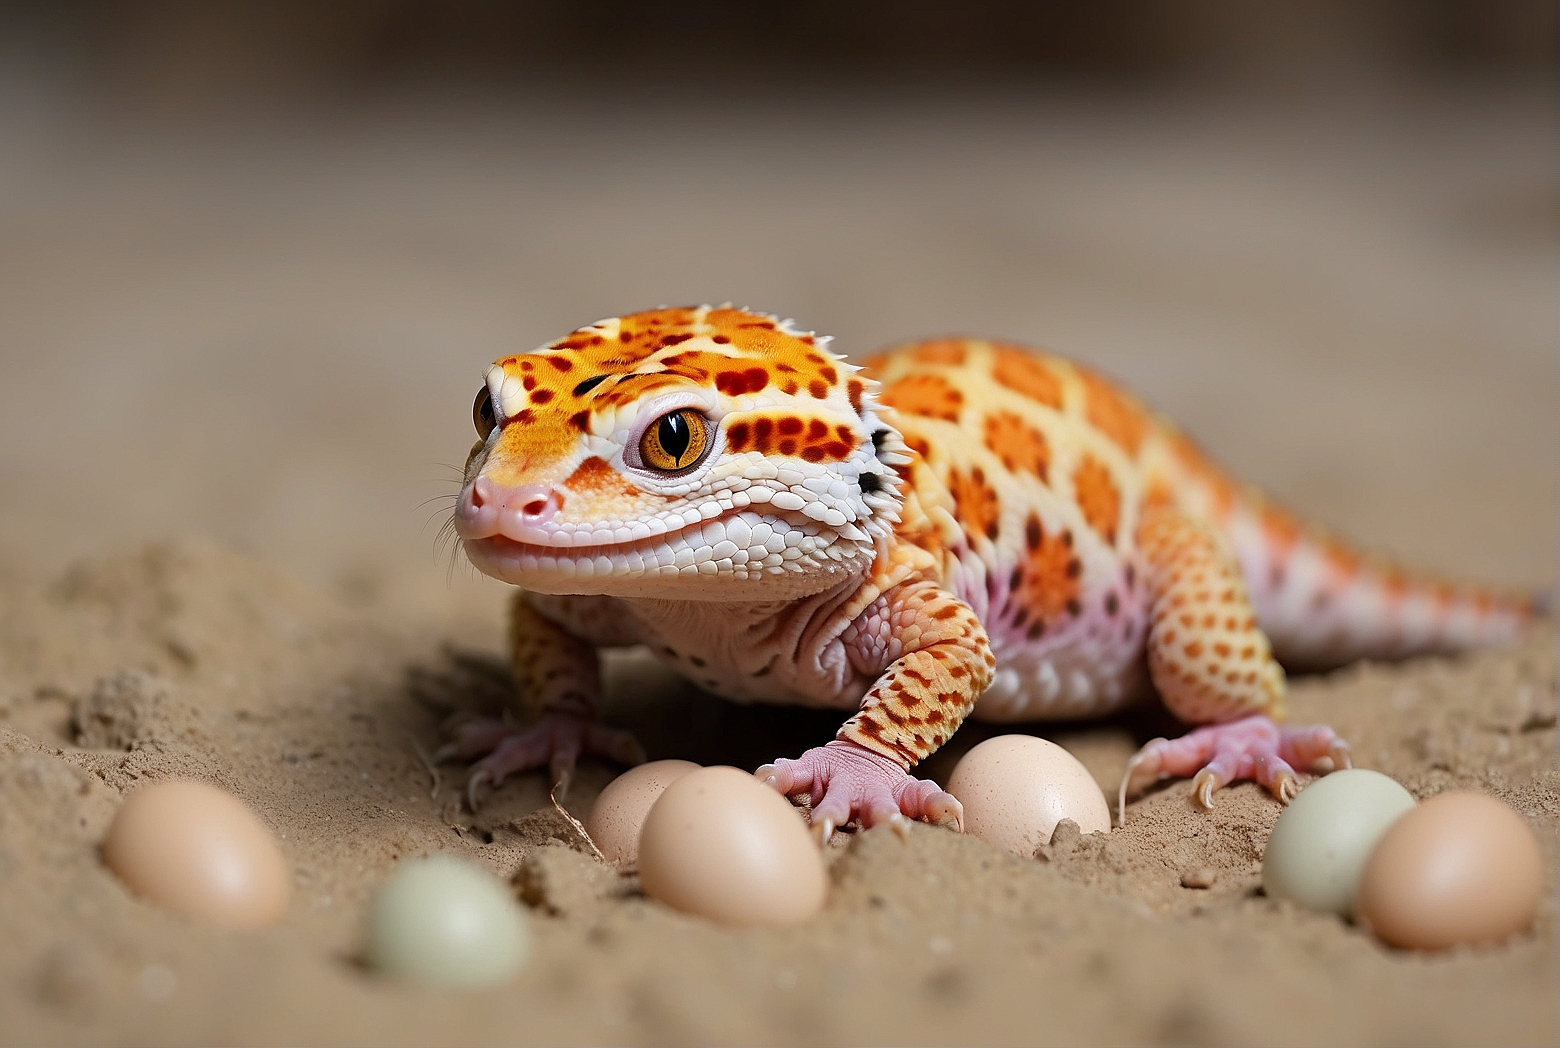 How Many Eggs Does A Leopard Gecko Lay In A Year